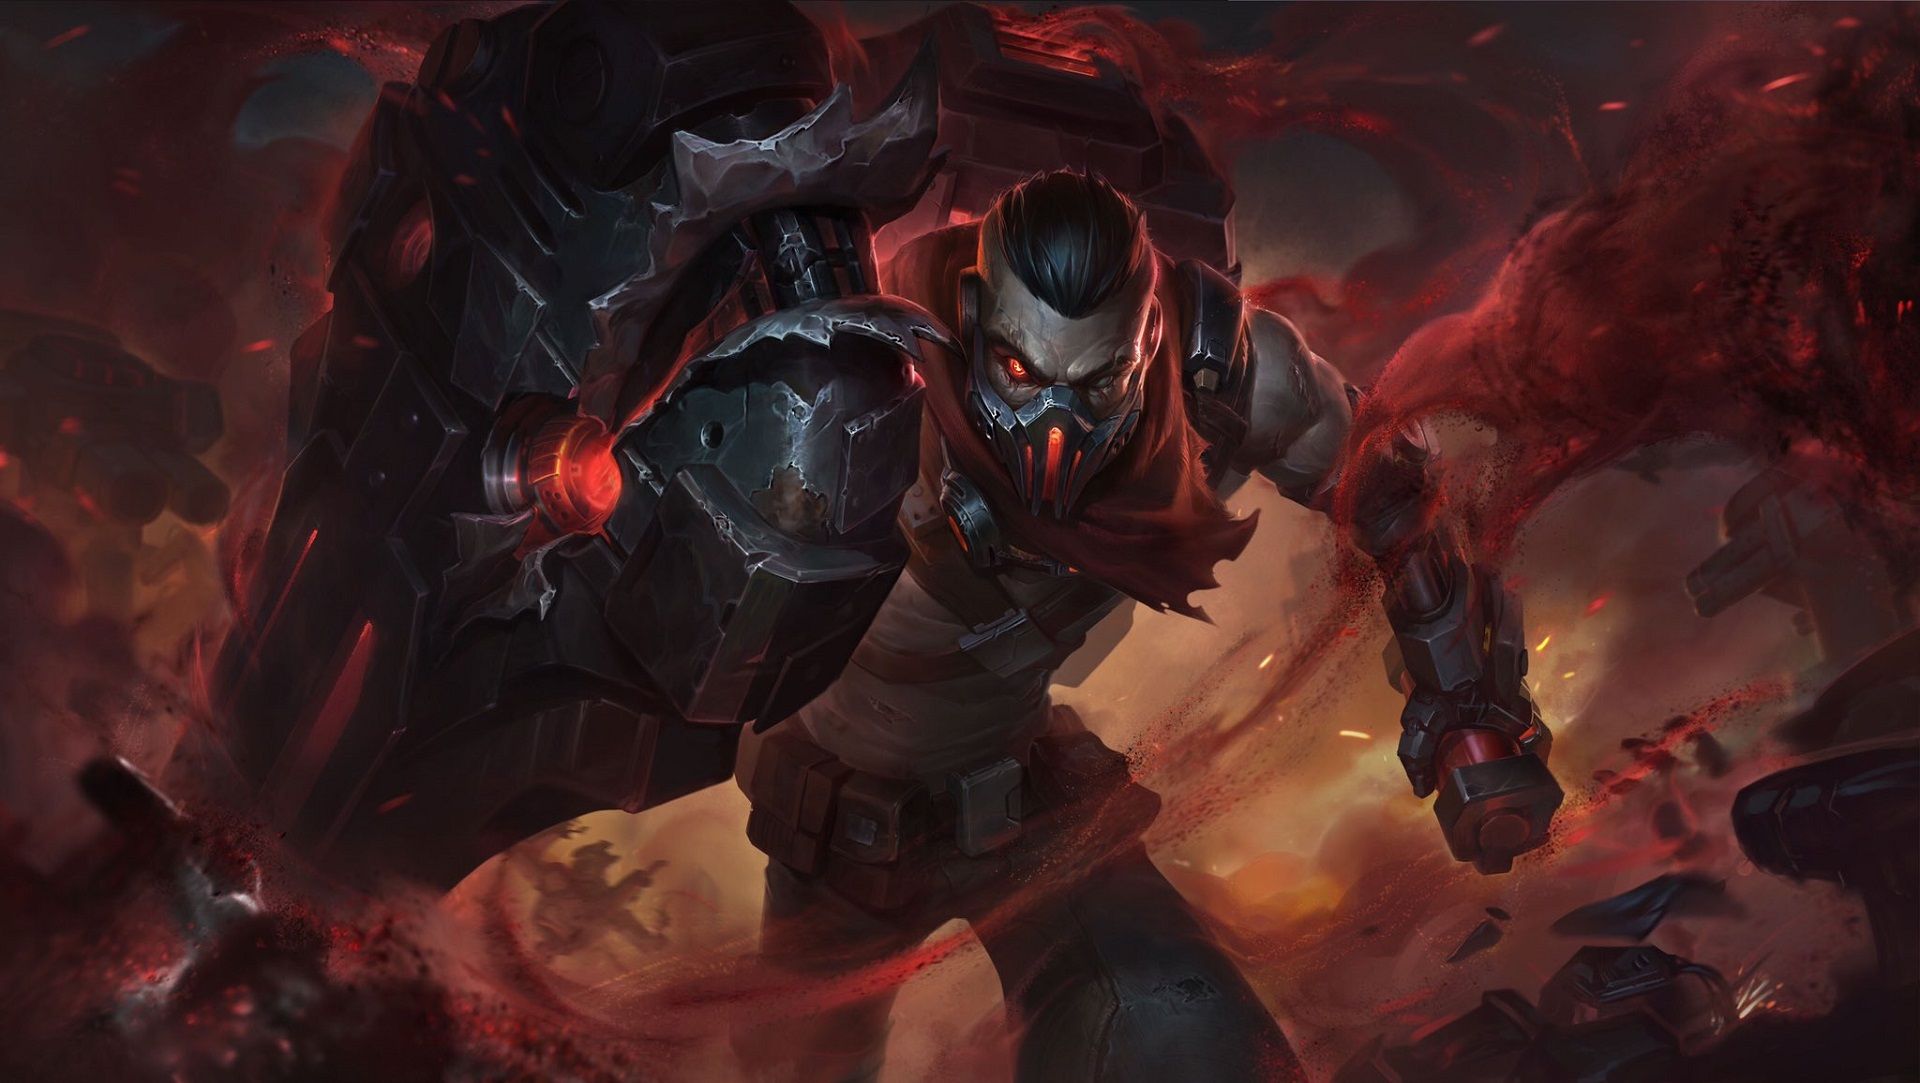 Resistance Yorick, Singed, Jayce Wallpapers (Full HD splash arts): League of Legends (Drawing by Riot Games)